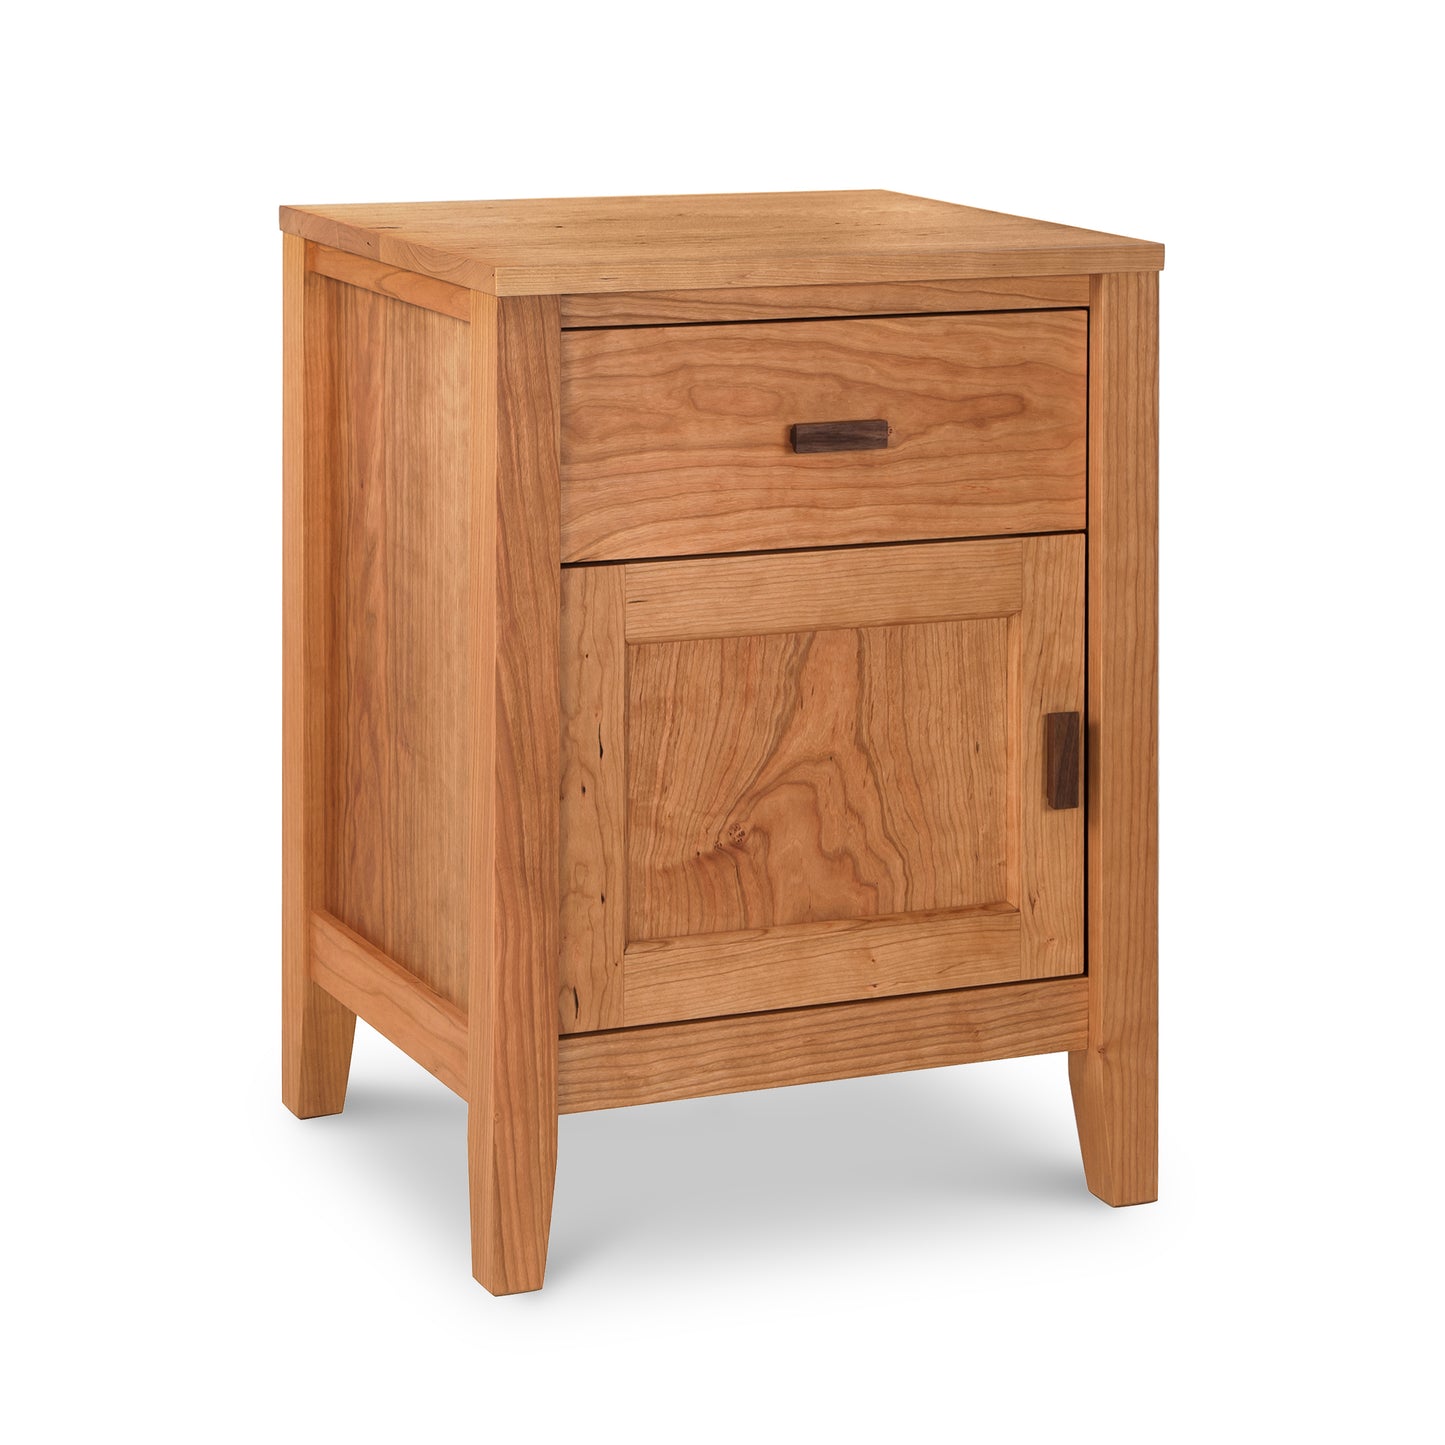 A Maple Corner Woodworks Andover Modern 1-Drawer Nightstand with Door, made of hardwood, featuring a single drawer.